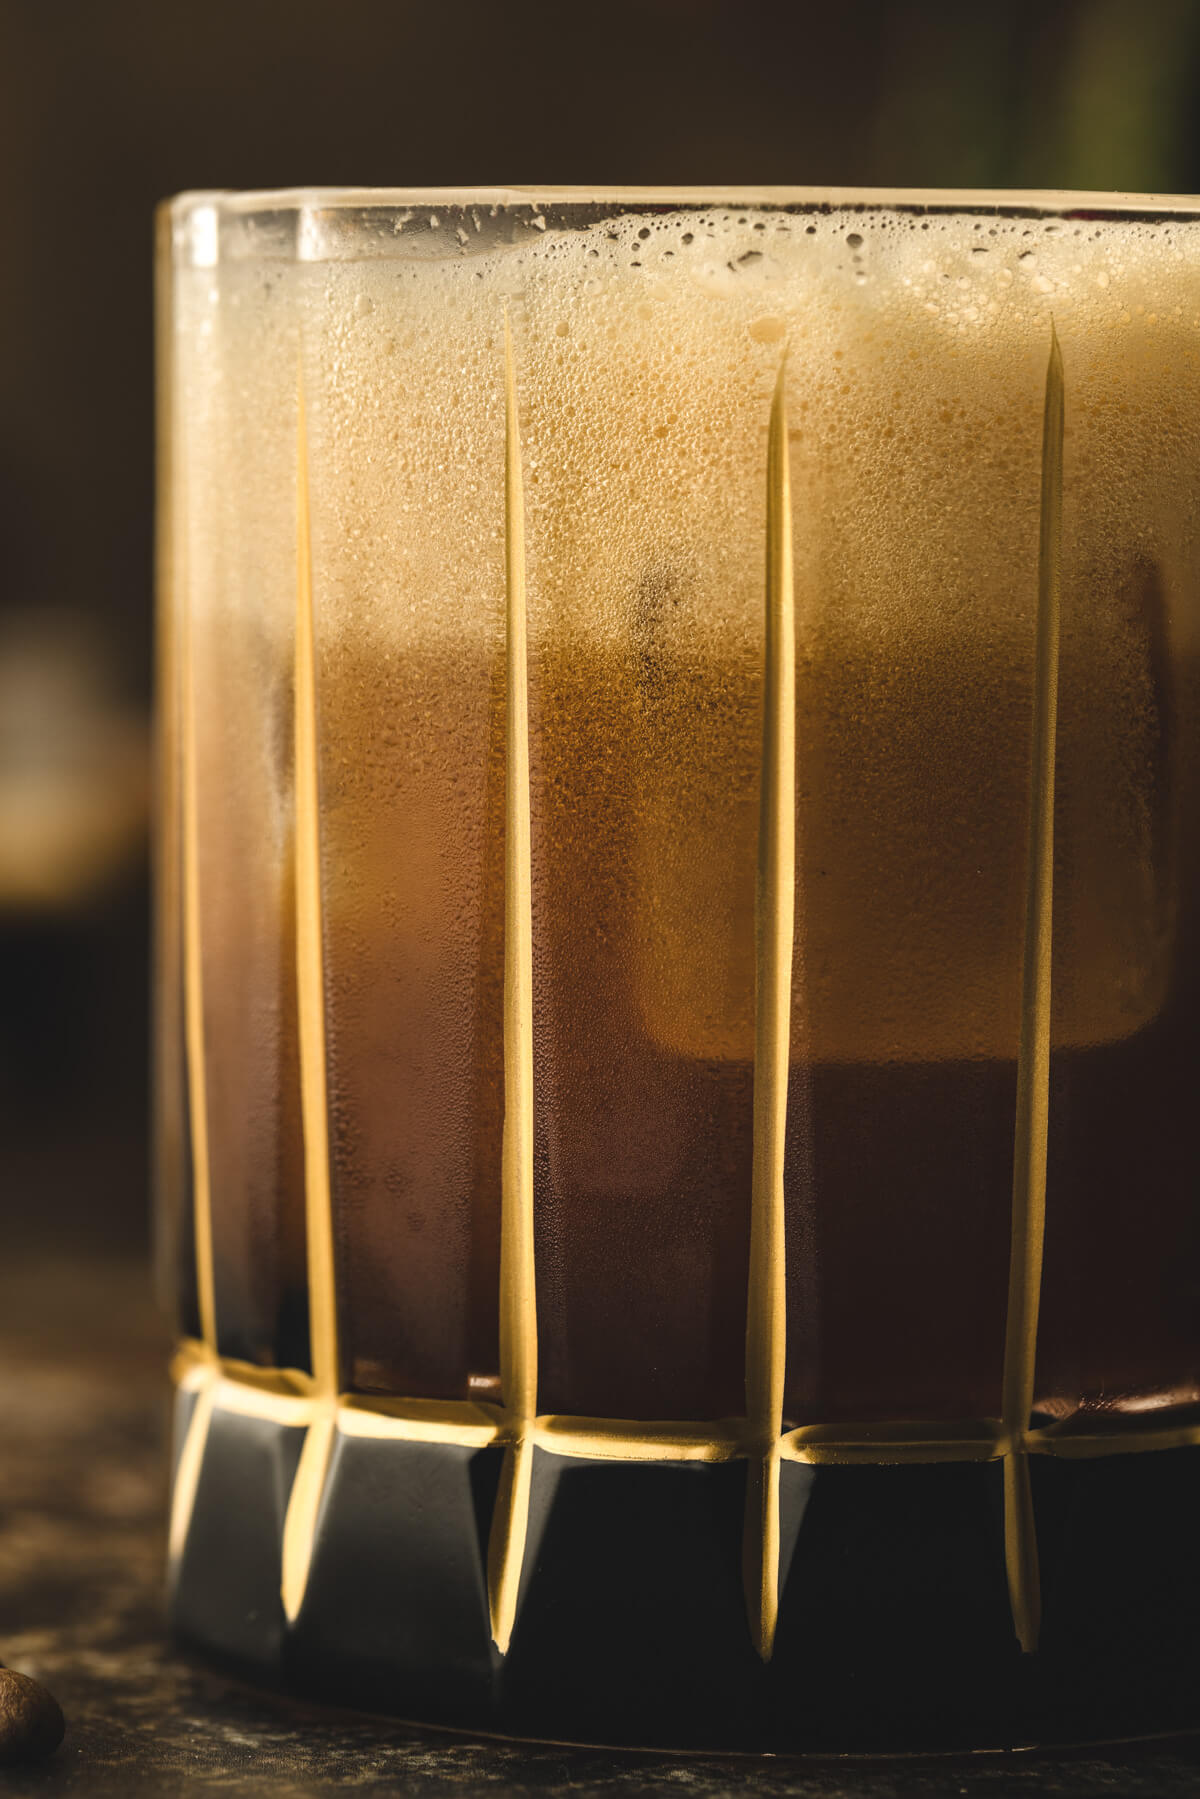 Close up of a Carajillo cocktail showing a distinctive top layer of coffee foam. 